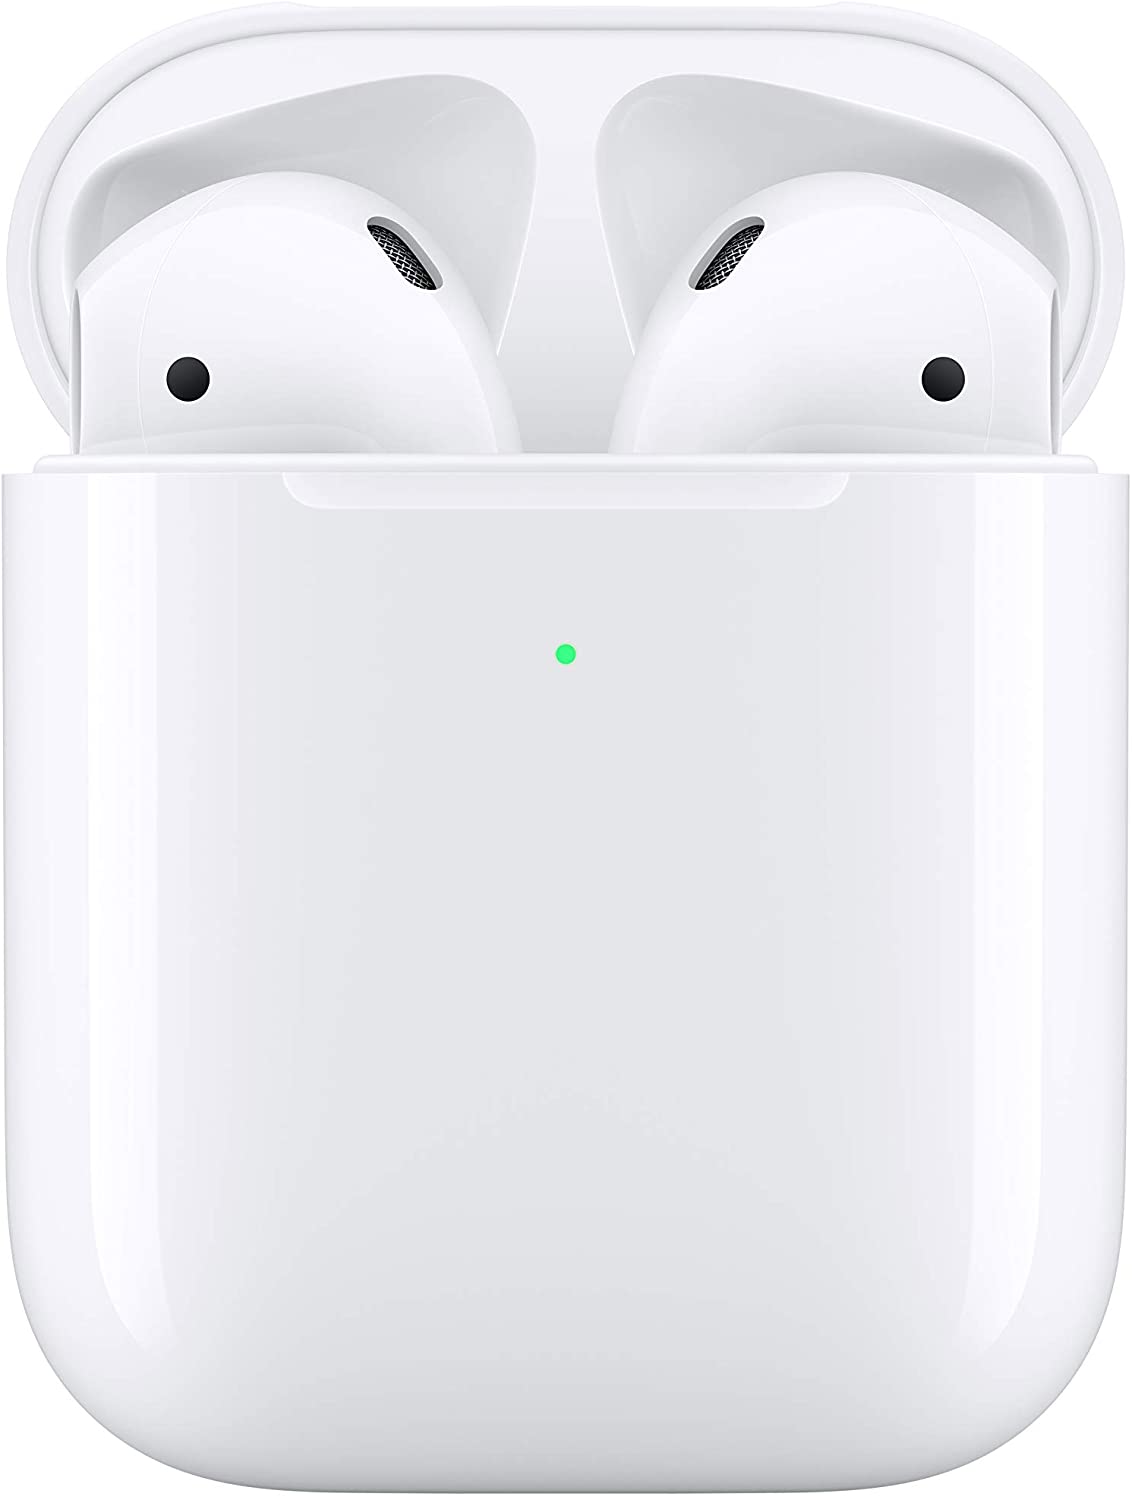 Apple Airpods with Wireless Charging Case White MRXJ2AM/A - $149.99 at Best Buy